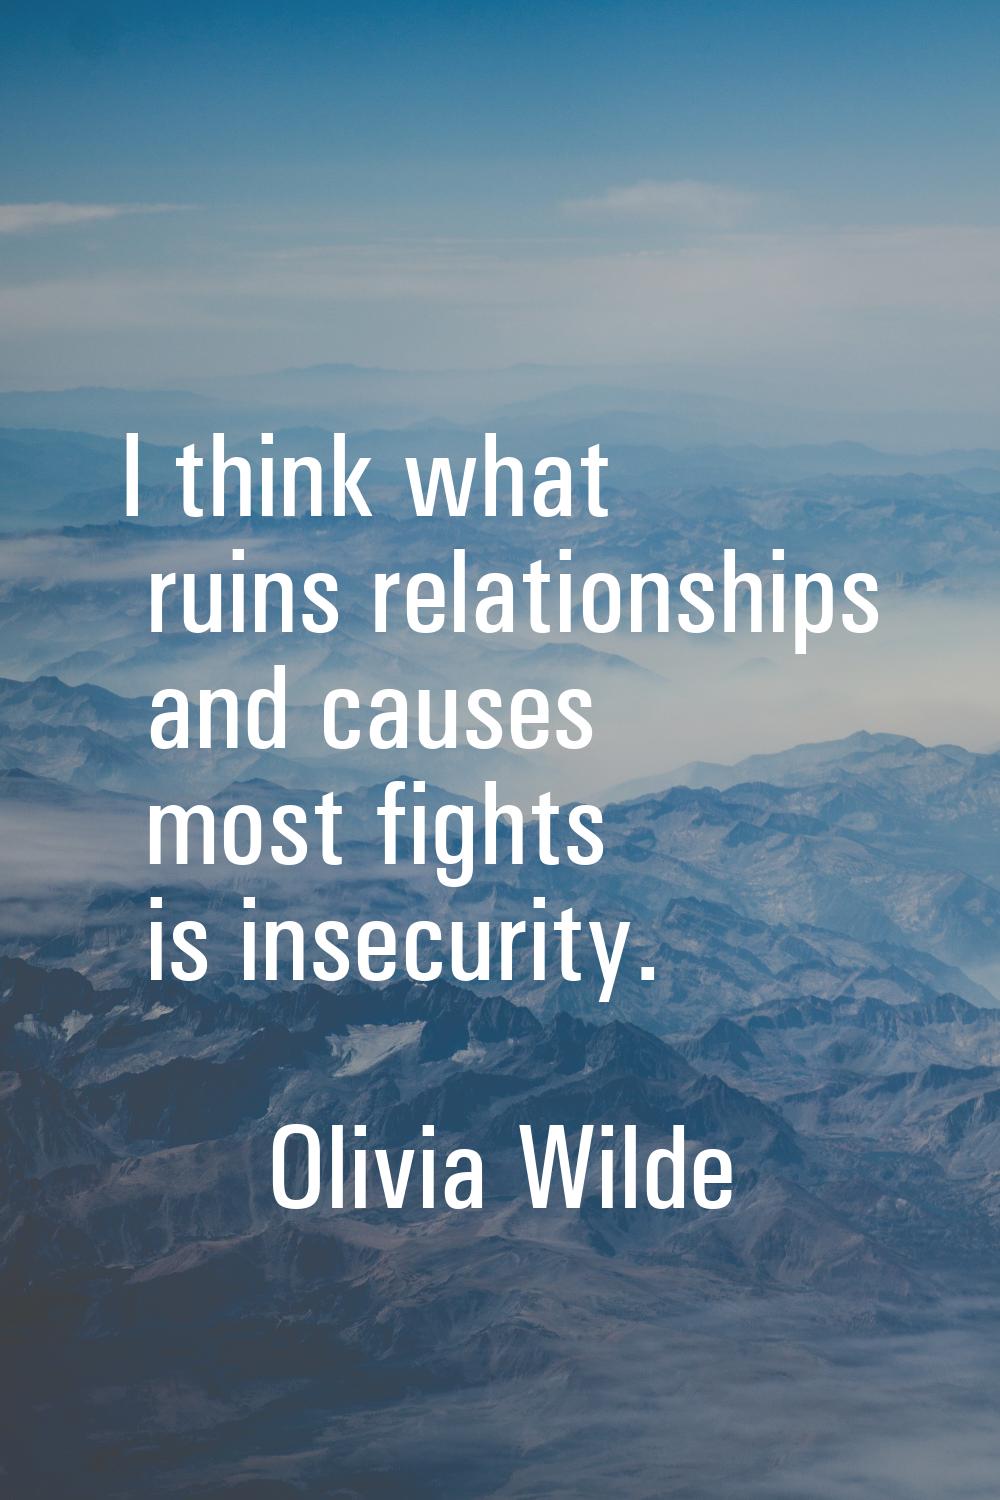 I think what ruins relationships and causes most fights is insecurity.